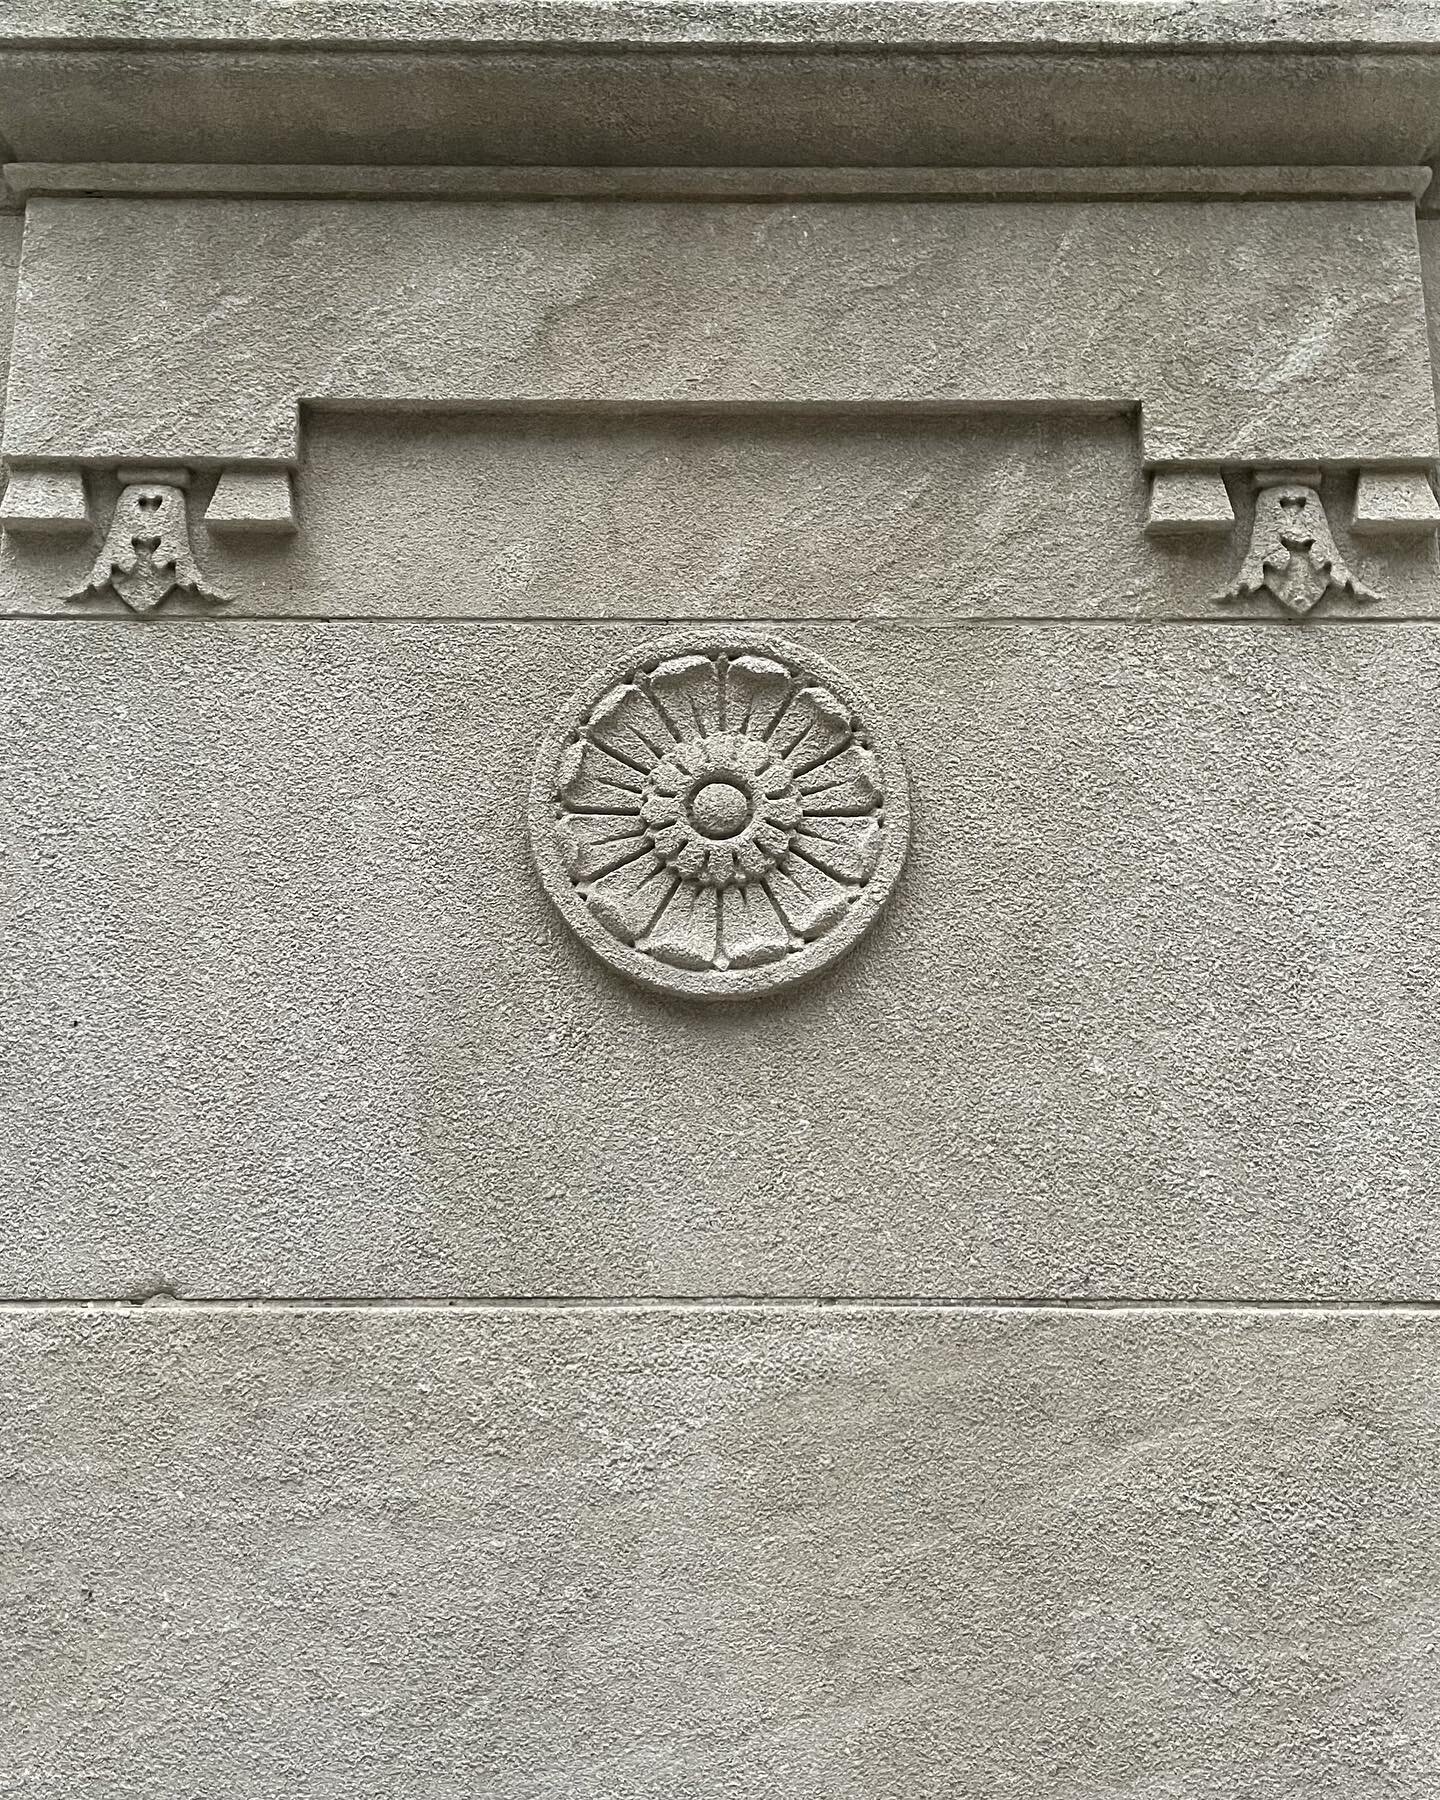 Perfectly placed rosette on the facade of a Sutton Place townhome. 

.
.
.
.

#Architecture #facade #limestone #rosette #details #construction #building #design #elegant #homedesign #inspiration #decoration #decor #style #aesthetic